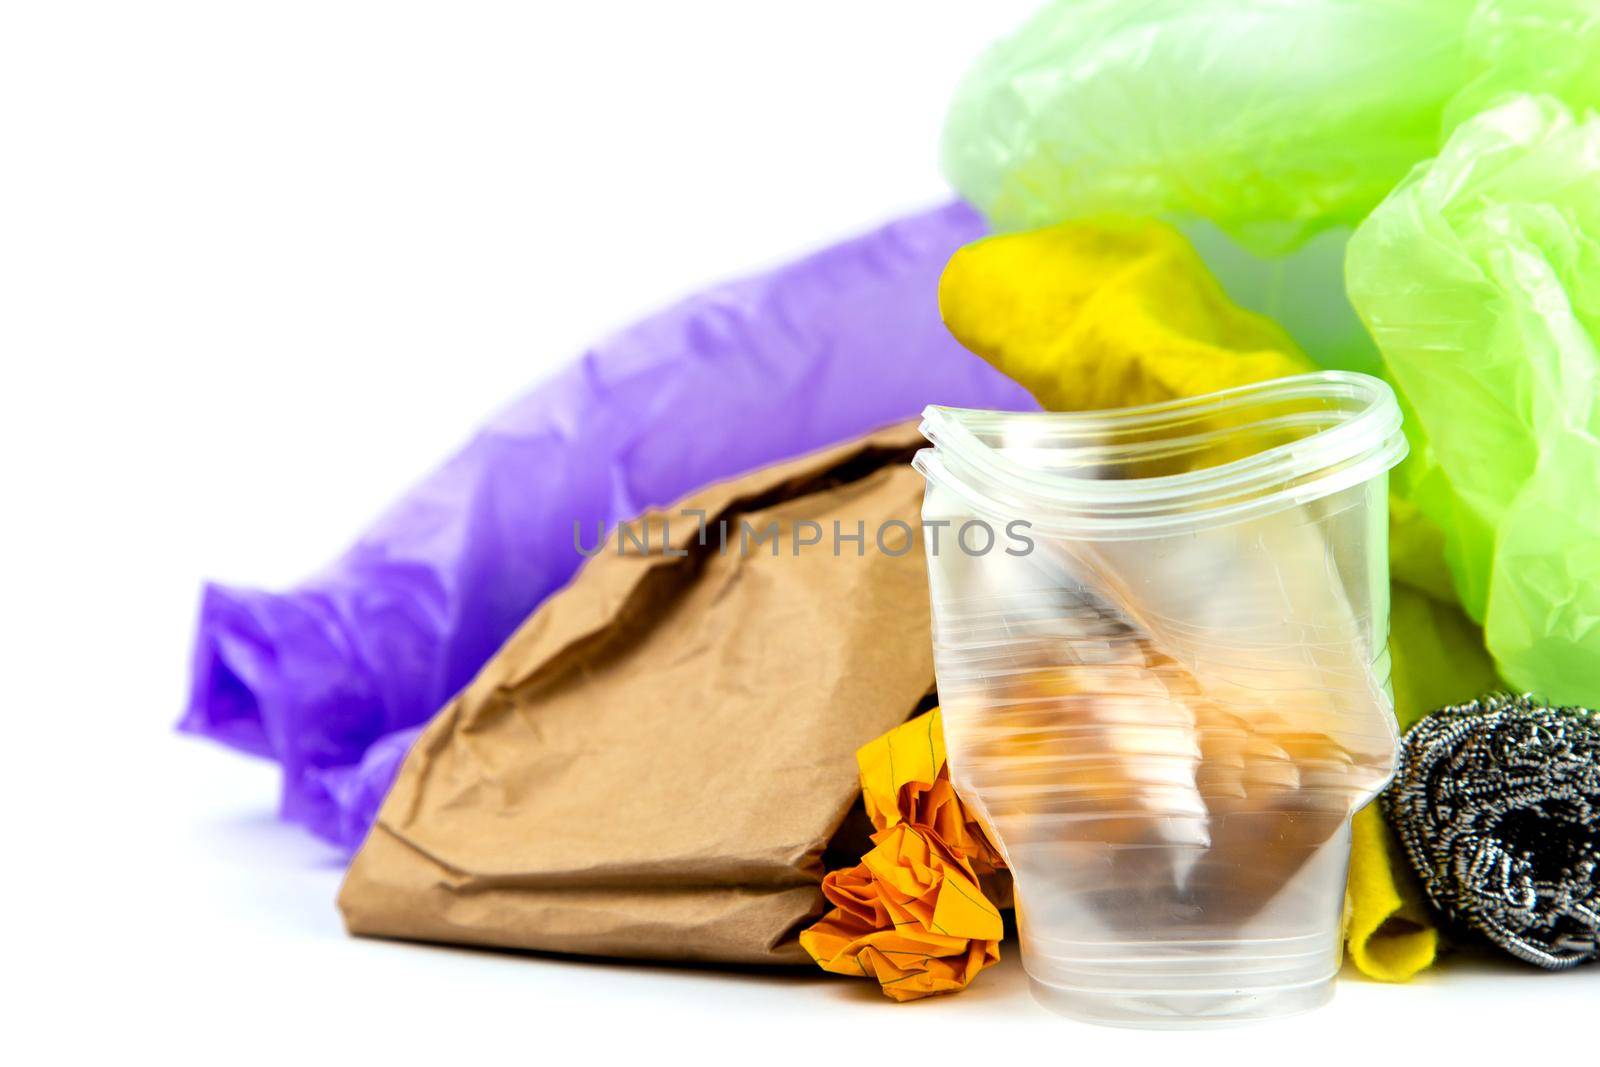 Concept of garbage and pollution. A pile of trash, crumpled plastic cup, packages, paper isolate on a white background.